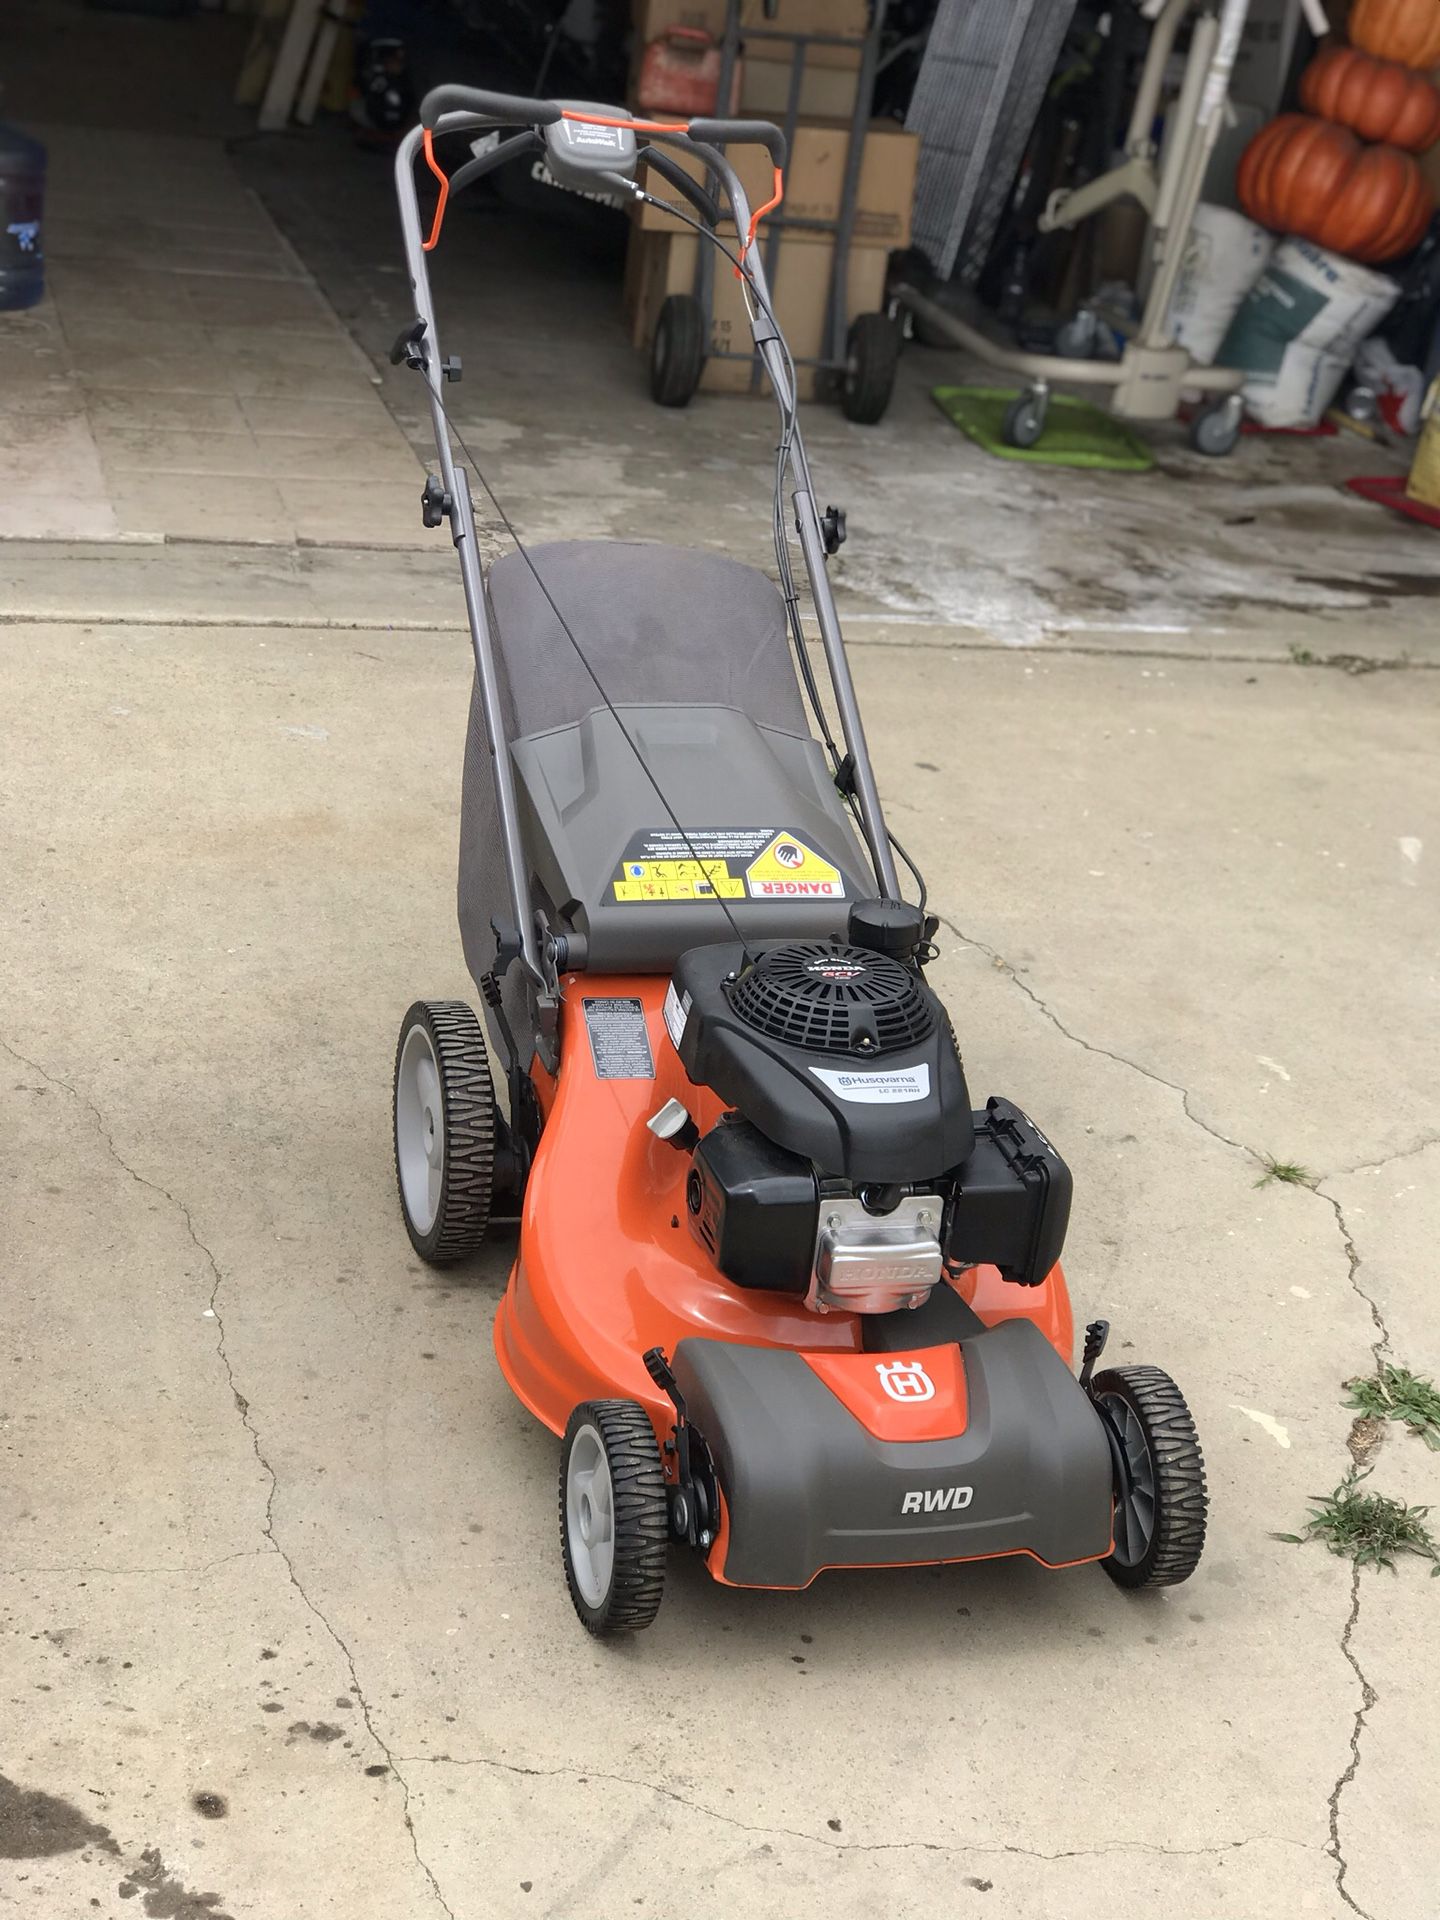 FIRM ON PRICE (Serious buyers only)Husqvarna LC221RH 160-cc 21-in Self-propelled Gas Lawn Mower with Honda Engine